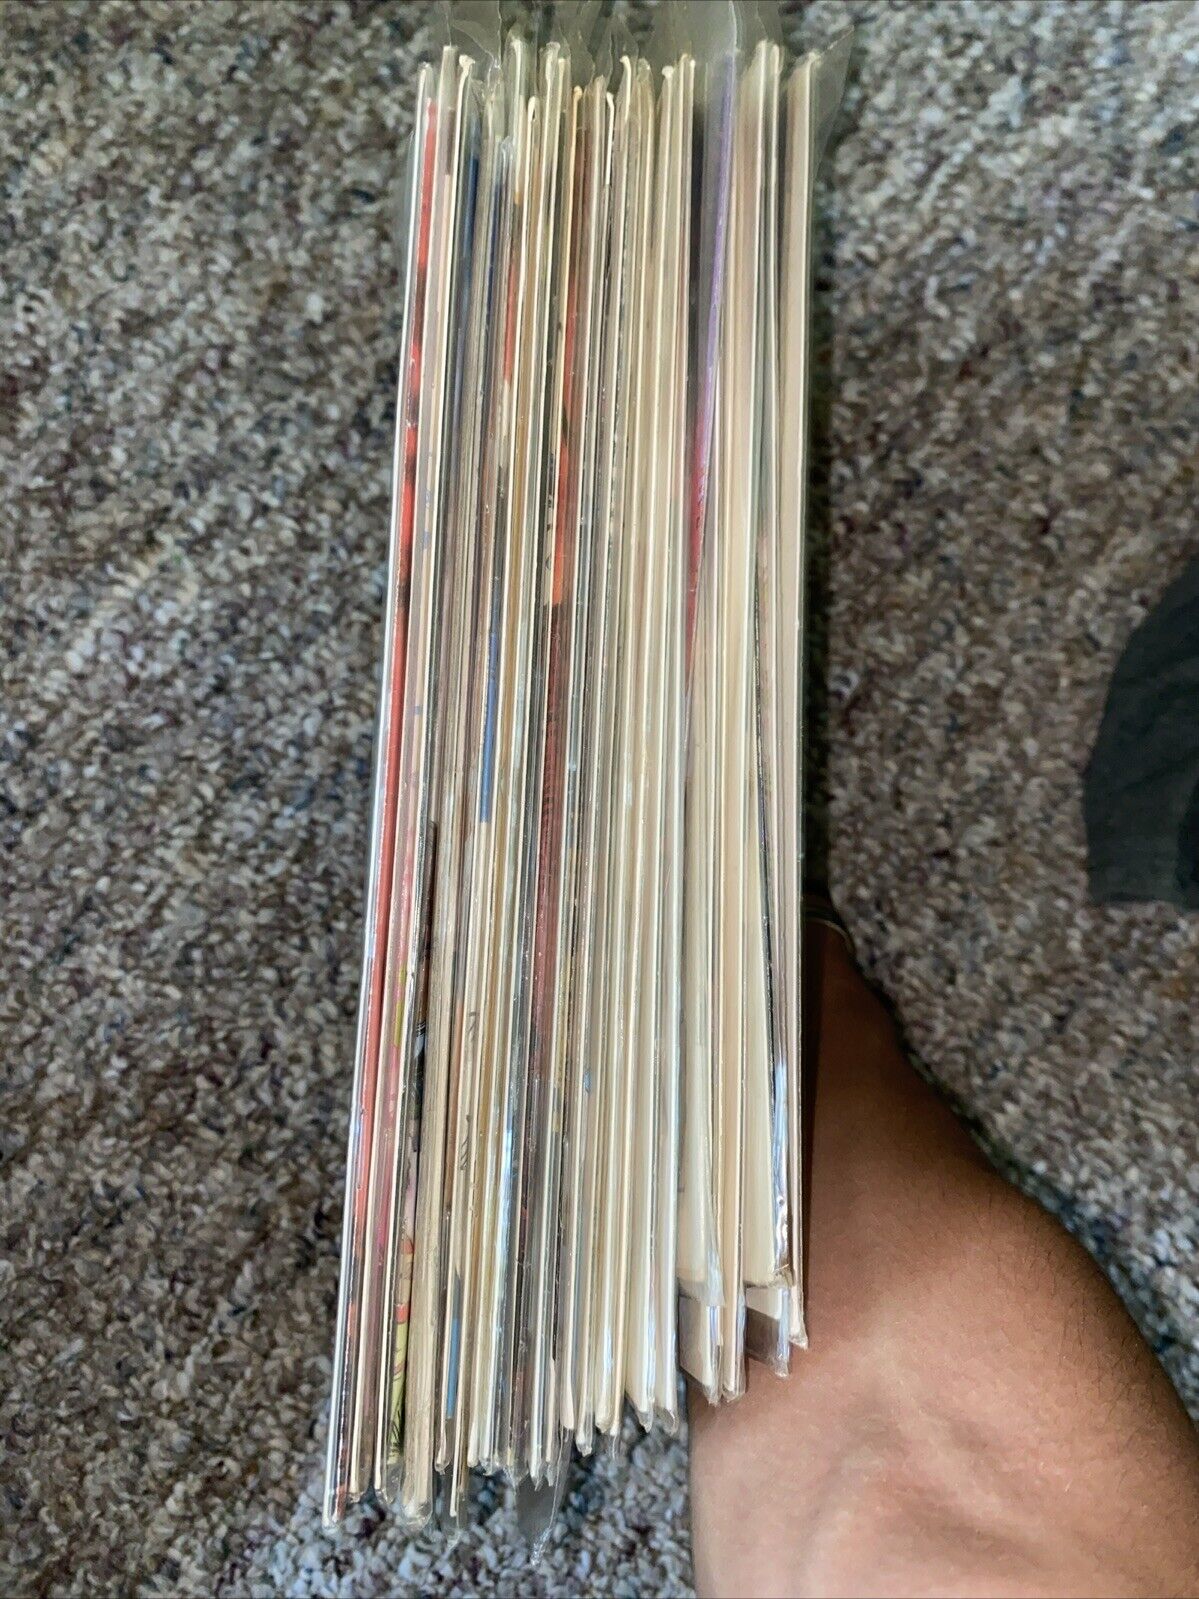 old marvel and dc comic books…SELLING THE BULK NOT INDIVIDUAL…all mixed together